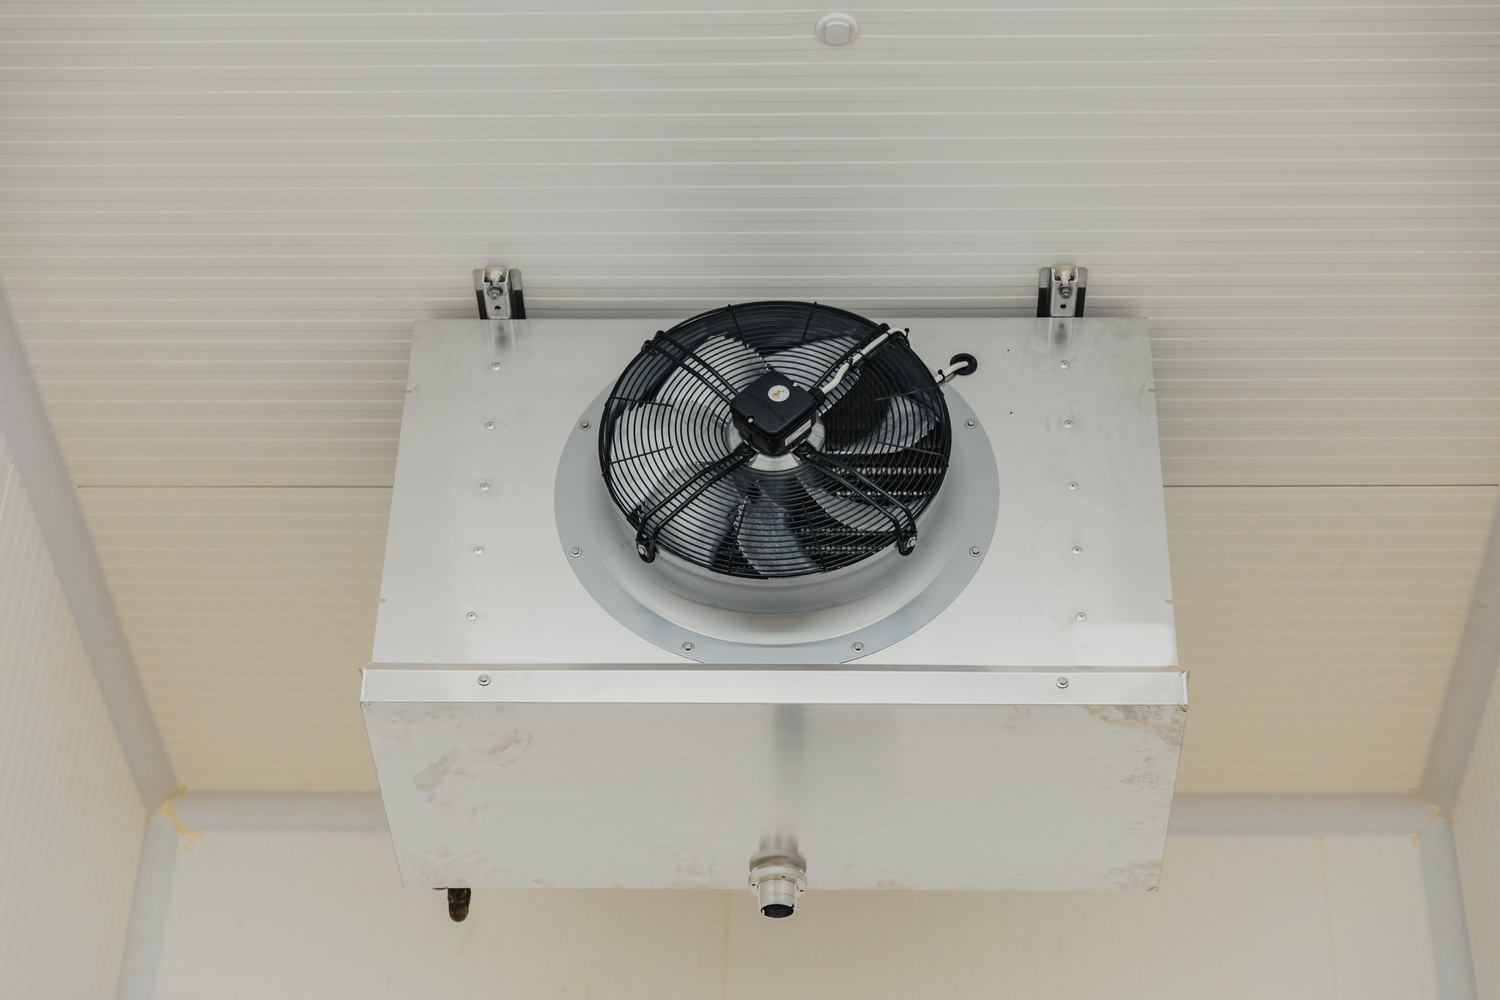 Fan systems in the cold room